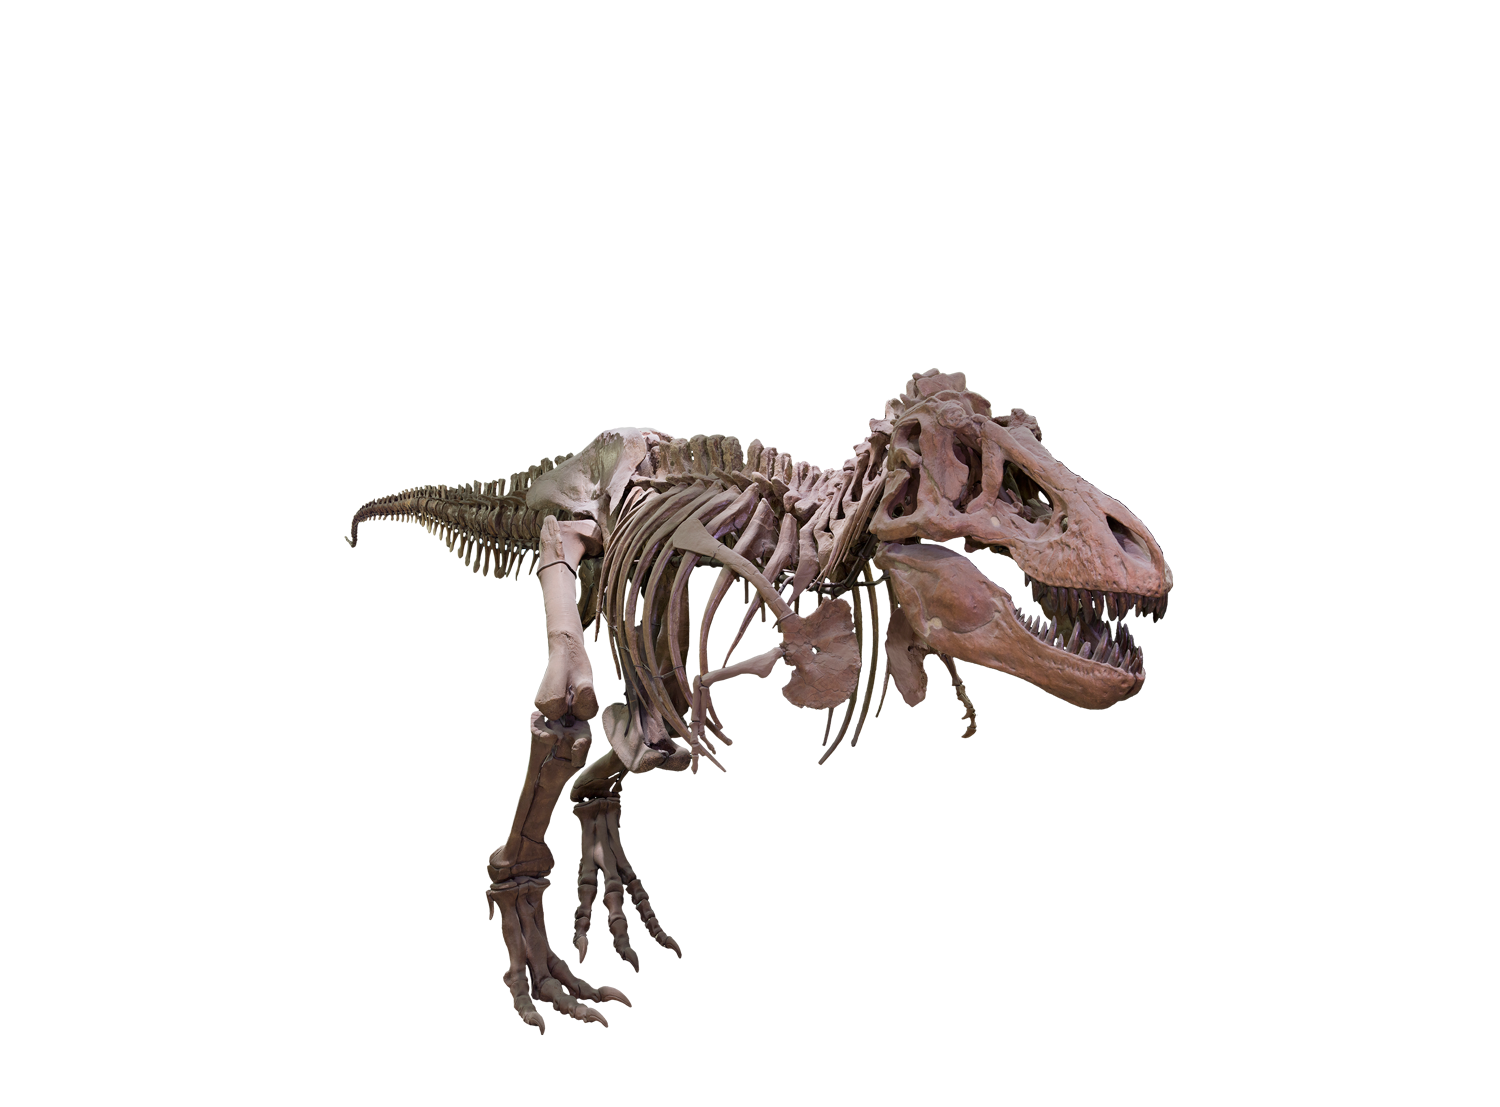 Tyrannosaurus rex mounted in a stalking position, with its head low, tail extended, and one foot slightly raised.